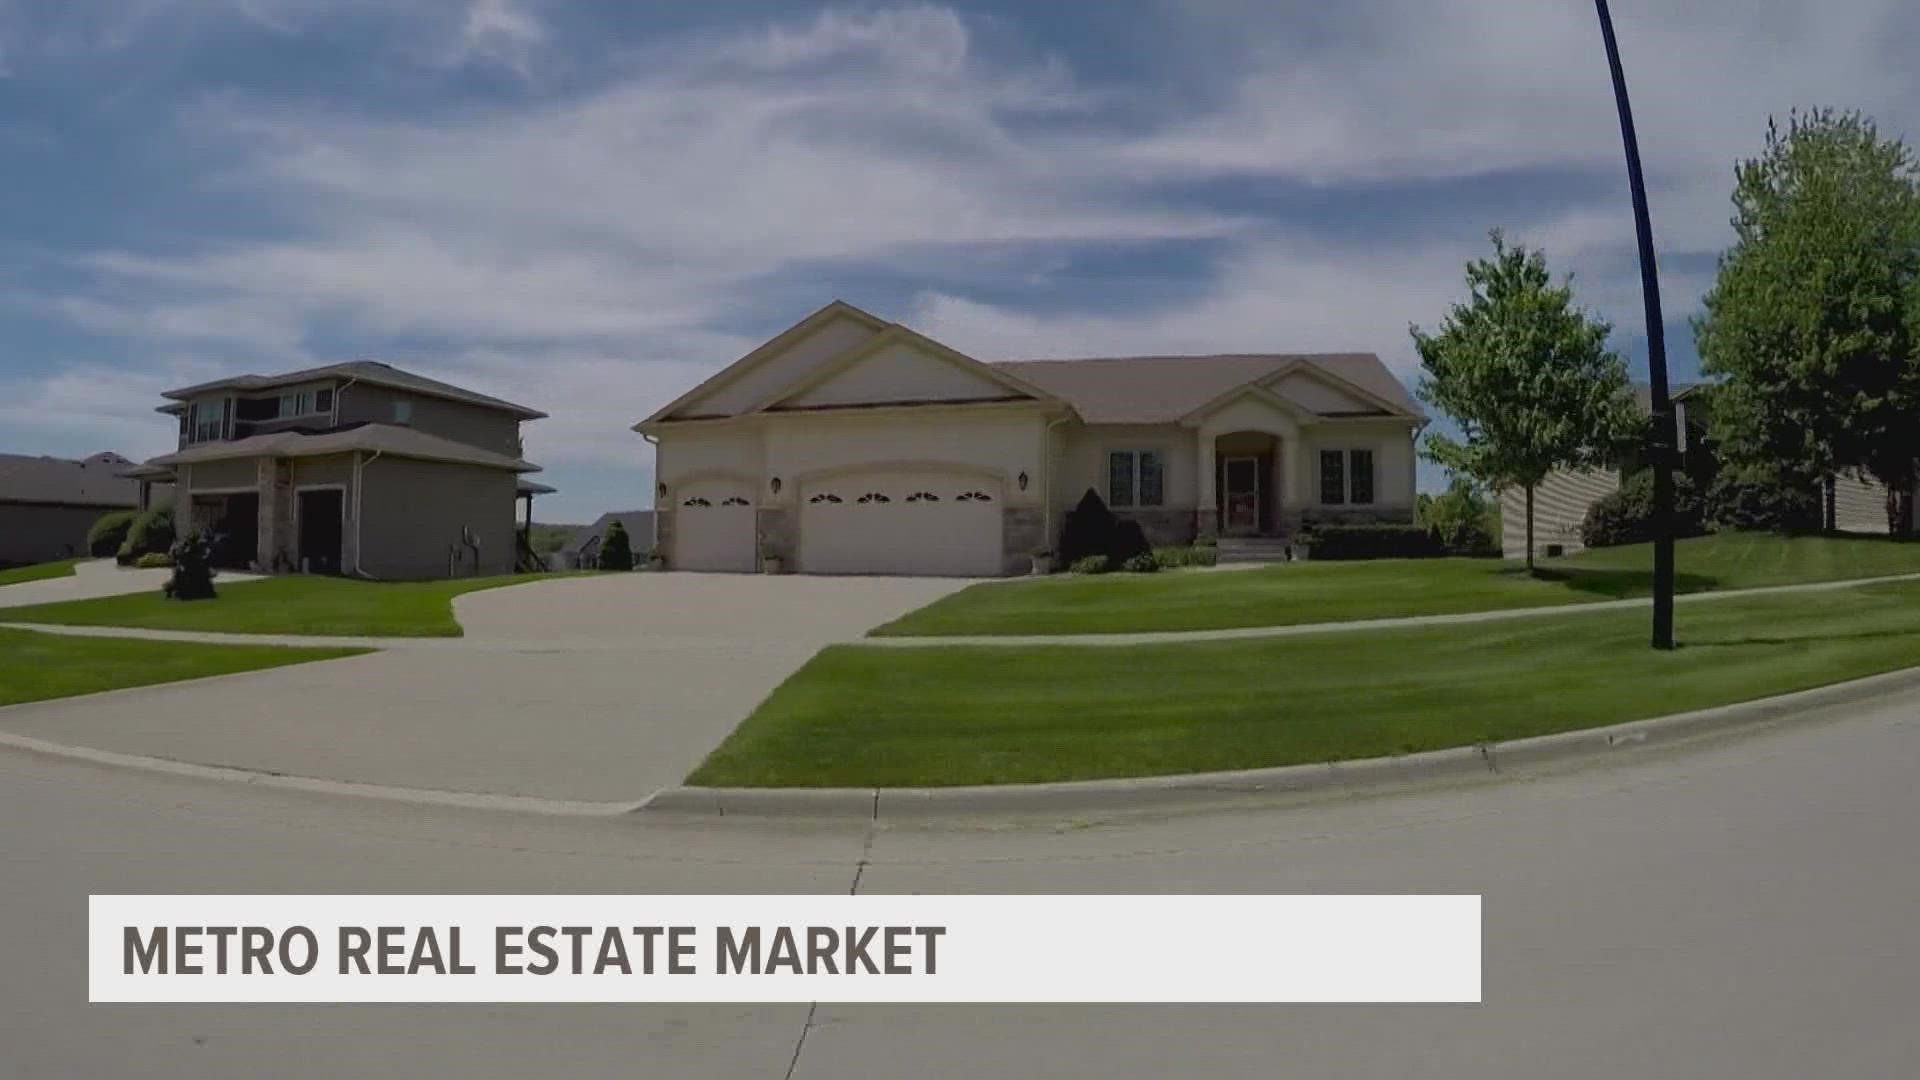 Real estate experts describe what the interest rate hike could mean for the metro real estate market.